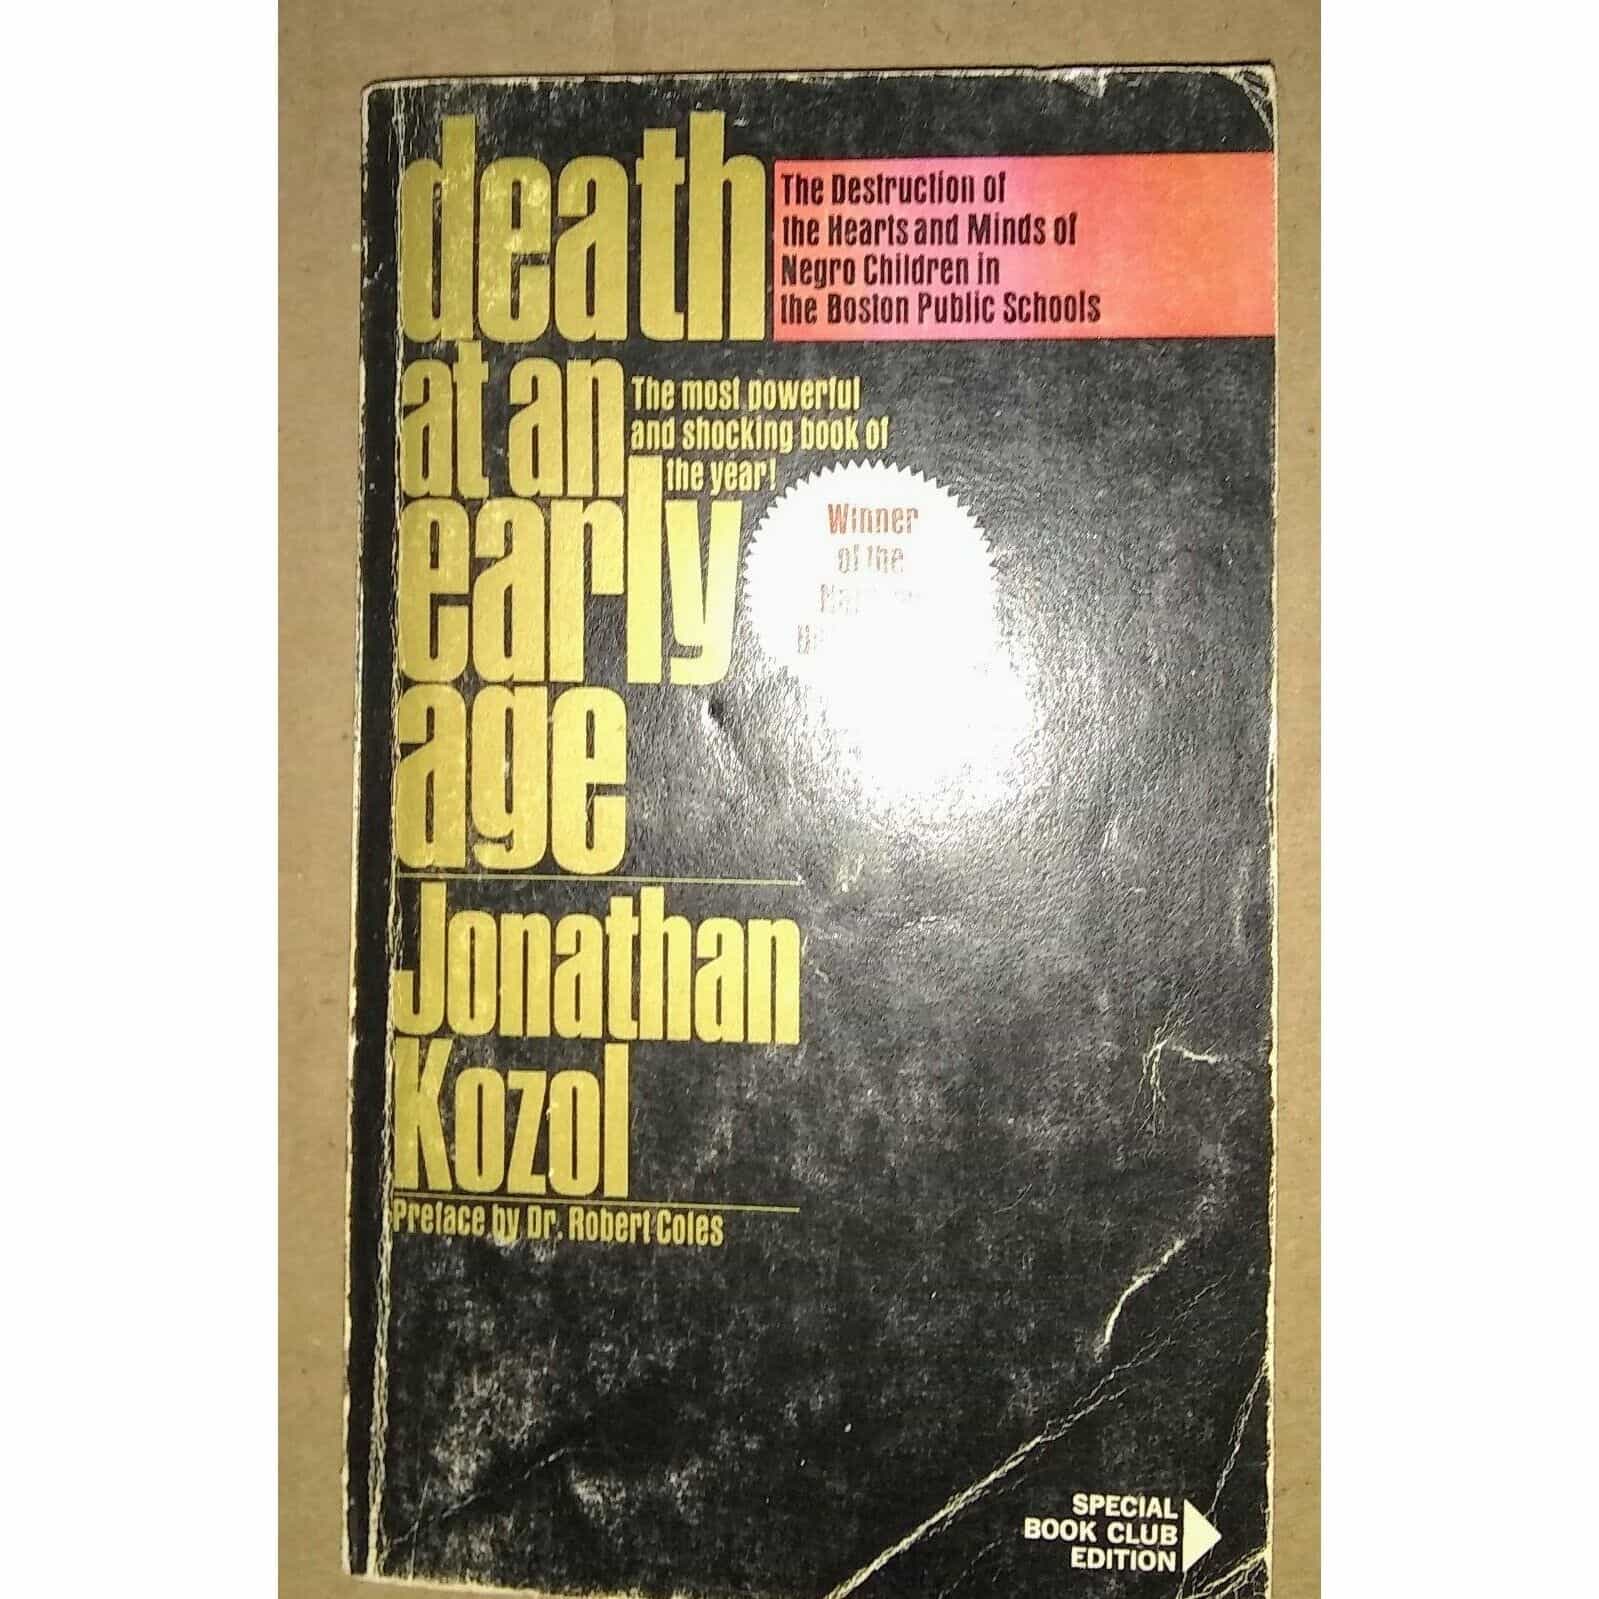 Death At An Early Age by Jonathan Kozol Antique Book – 1967